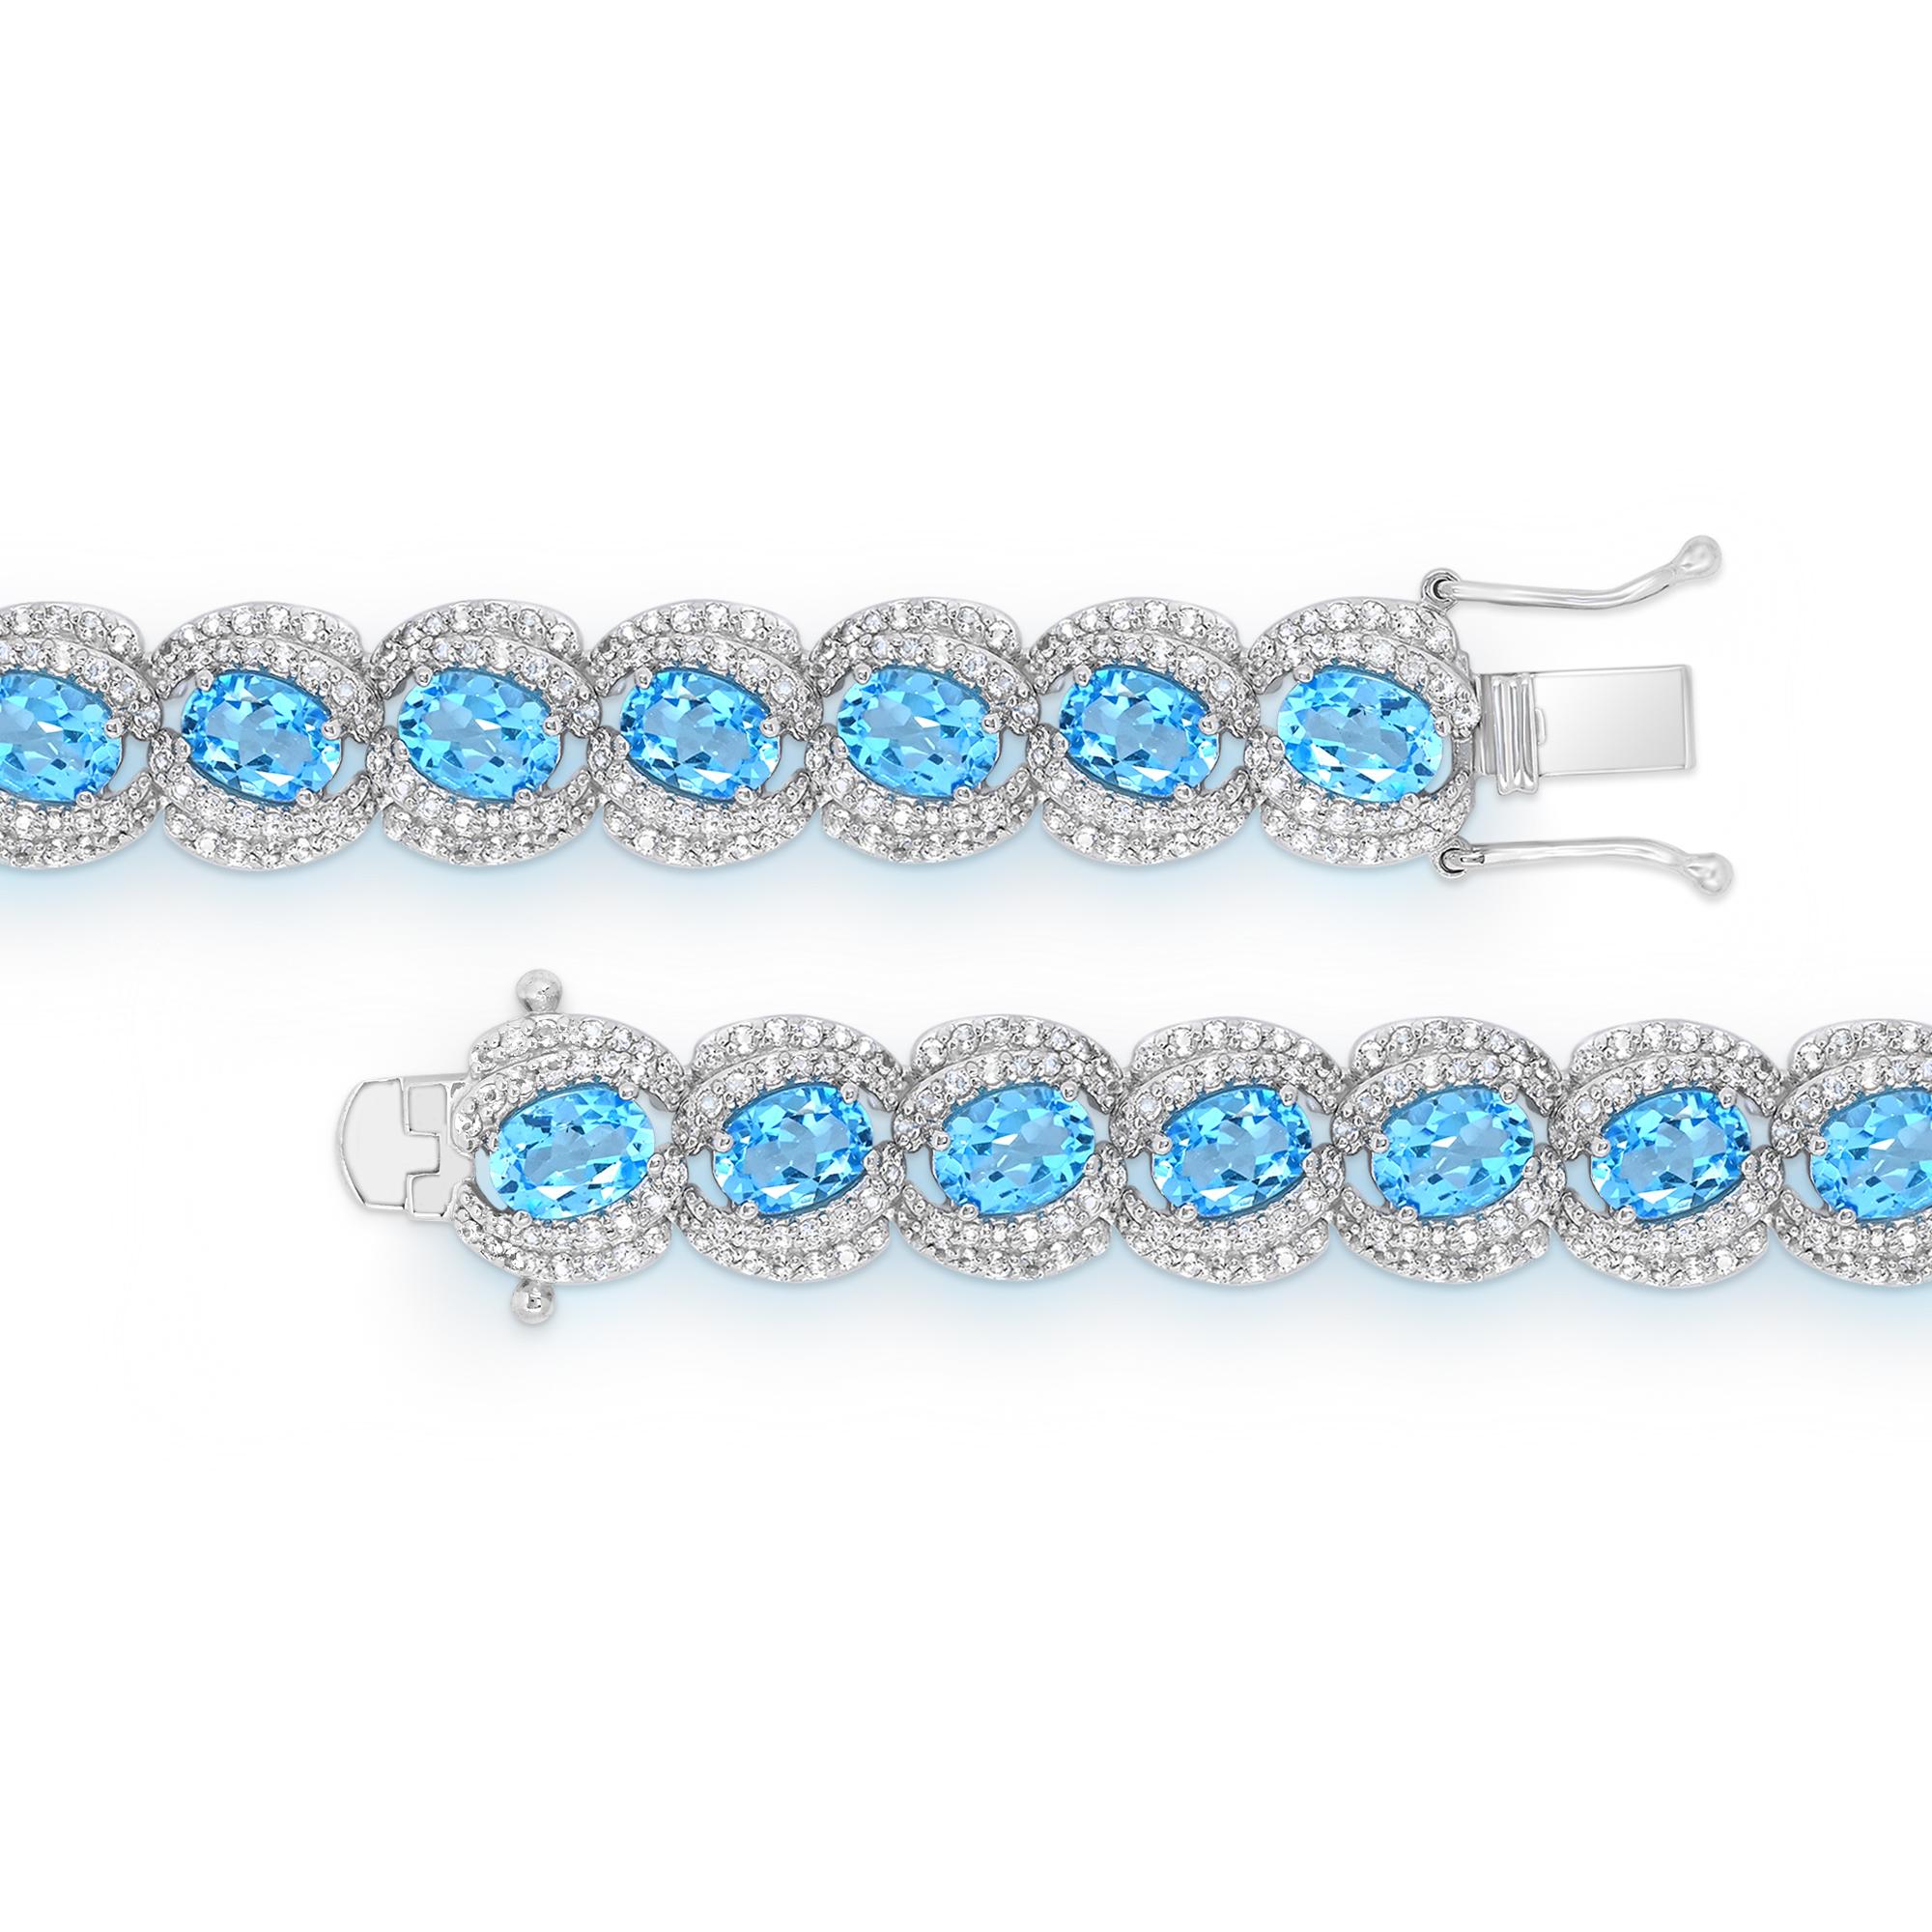 Contemporary 27-1/3 Carat Oval Swiss Blue Topaz and White Topaz Bracelet in Sterling Silver For Sale